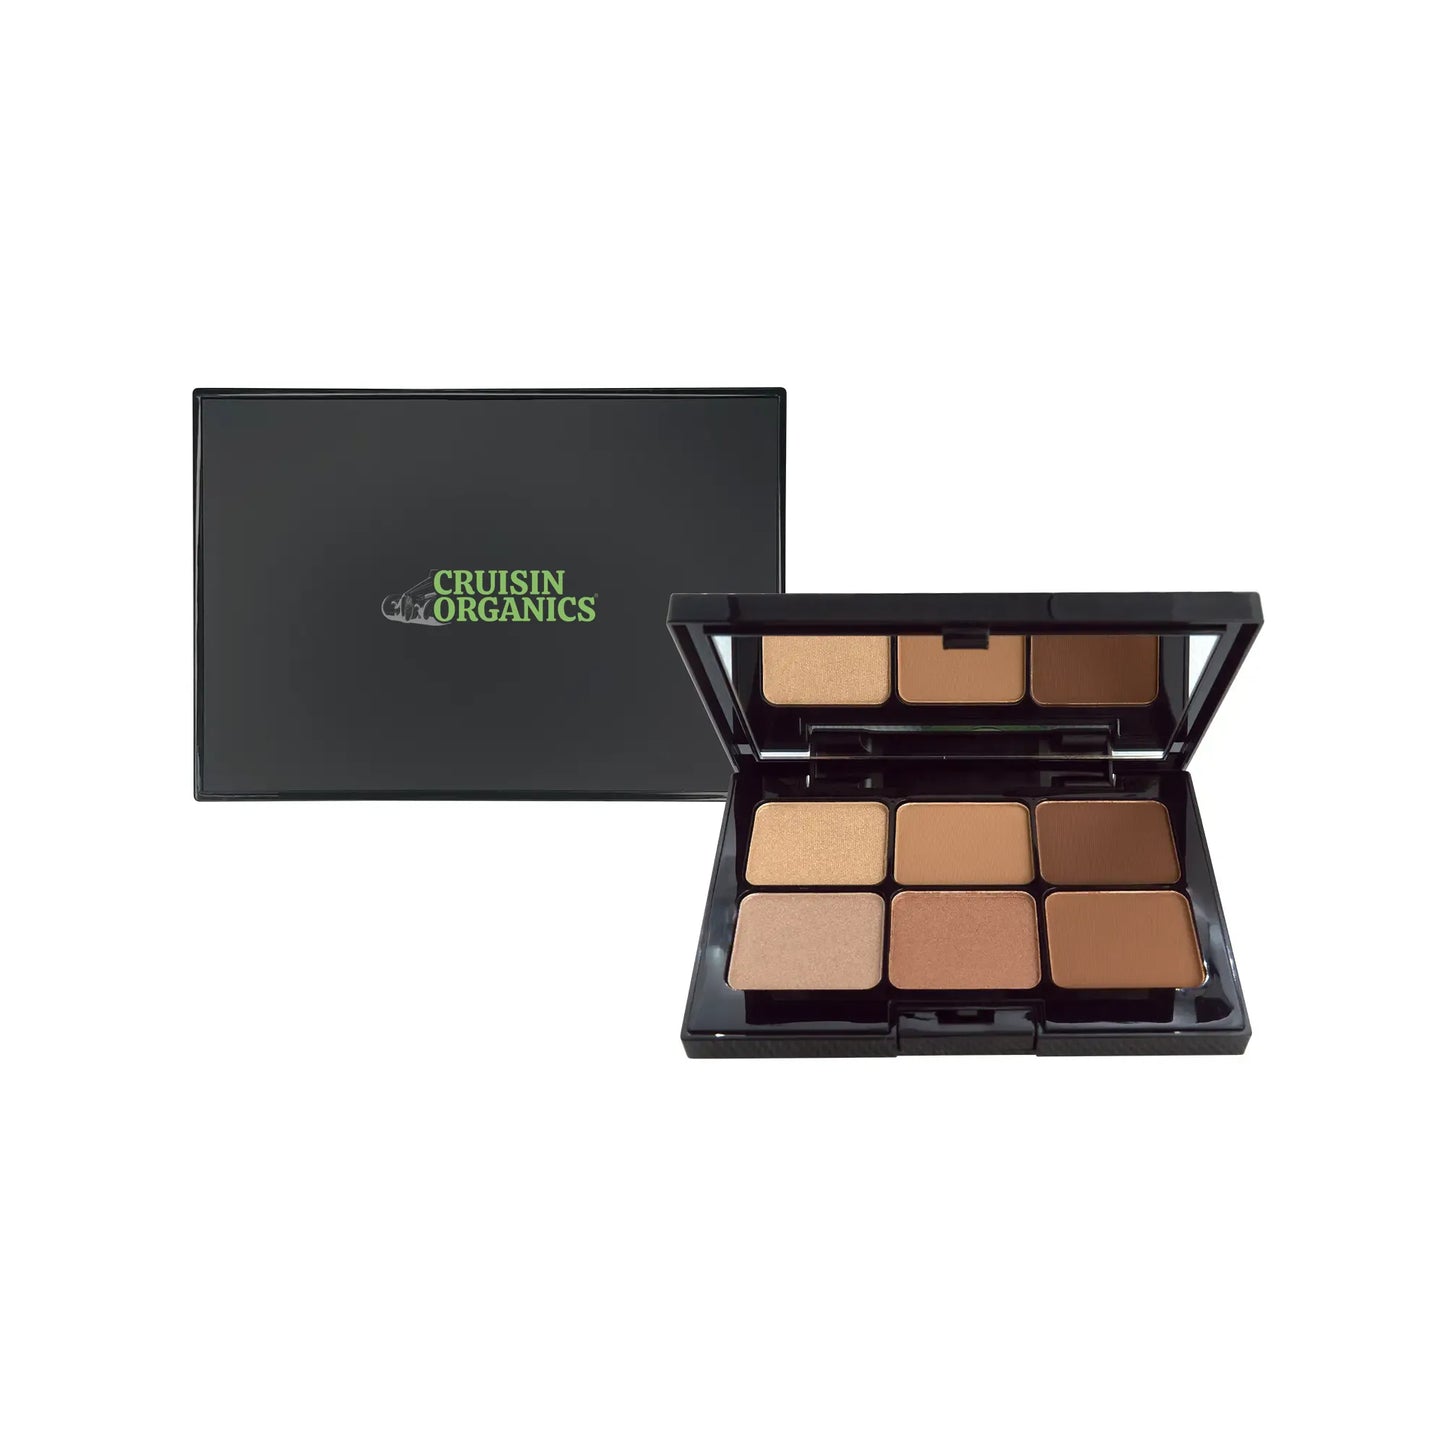 The Caramel Kiss eyeshadow palette from Cruisin Organics. Blendable and easily layered with creamy textures and buildable hues. Richly pigmented, with long-lasting, matte or shimmering finishes that provide a luminous, velvety look. Applying it gently and easily safeguards the sensitive eye area.